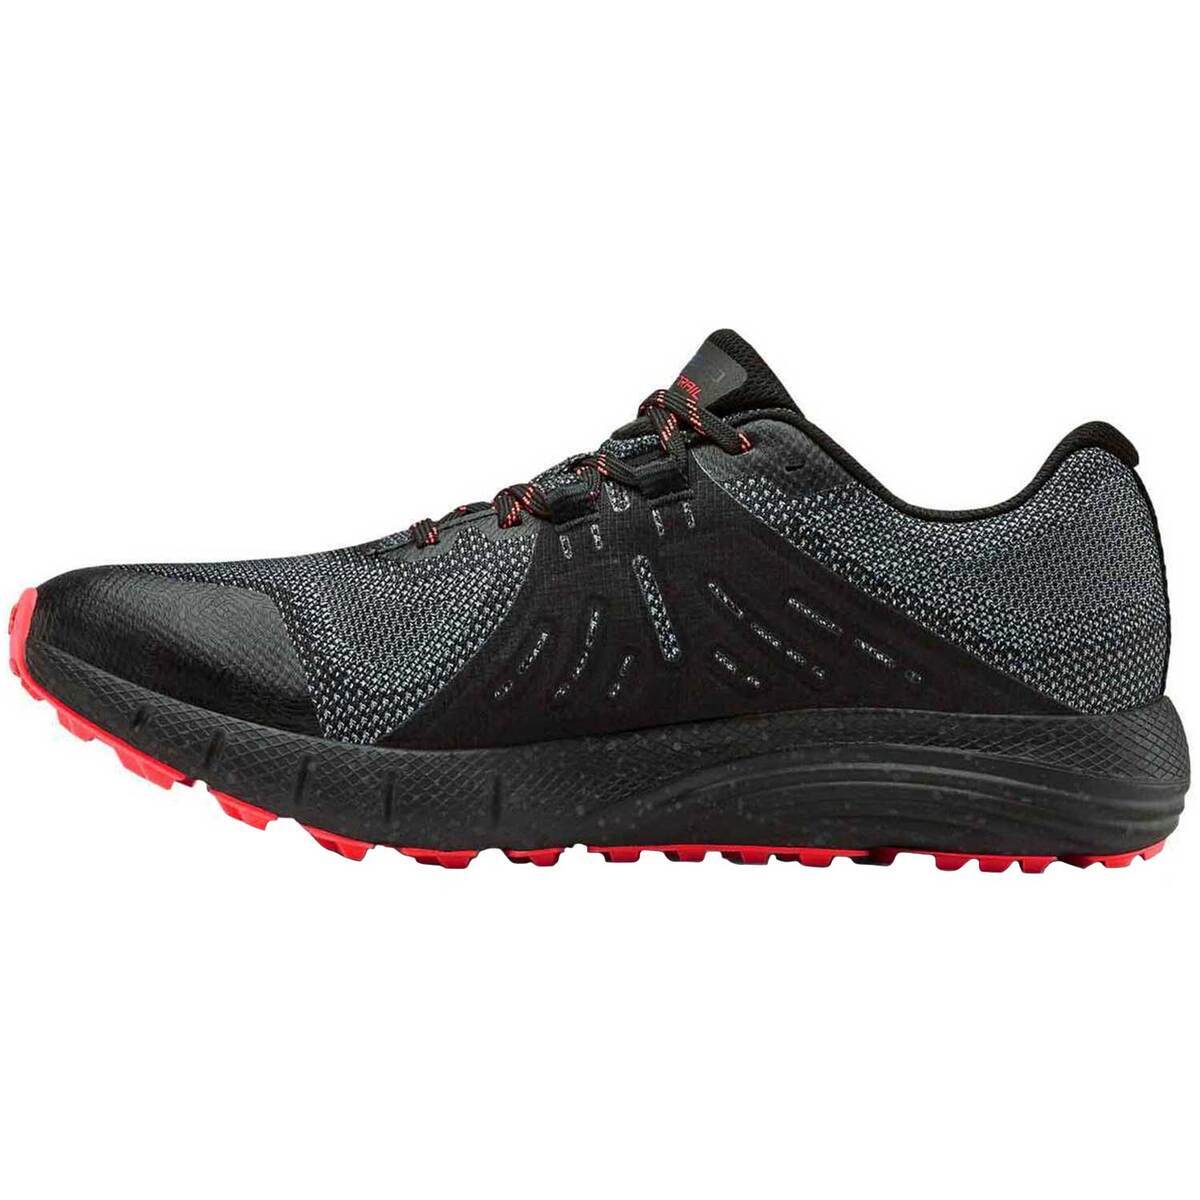 Under Armour Men's Charged Bandit Waterproof Trail Running Shoes ...